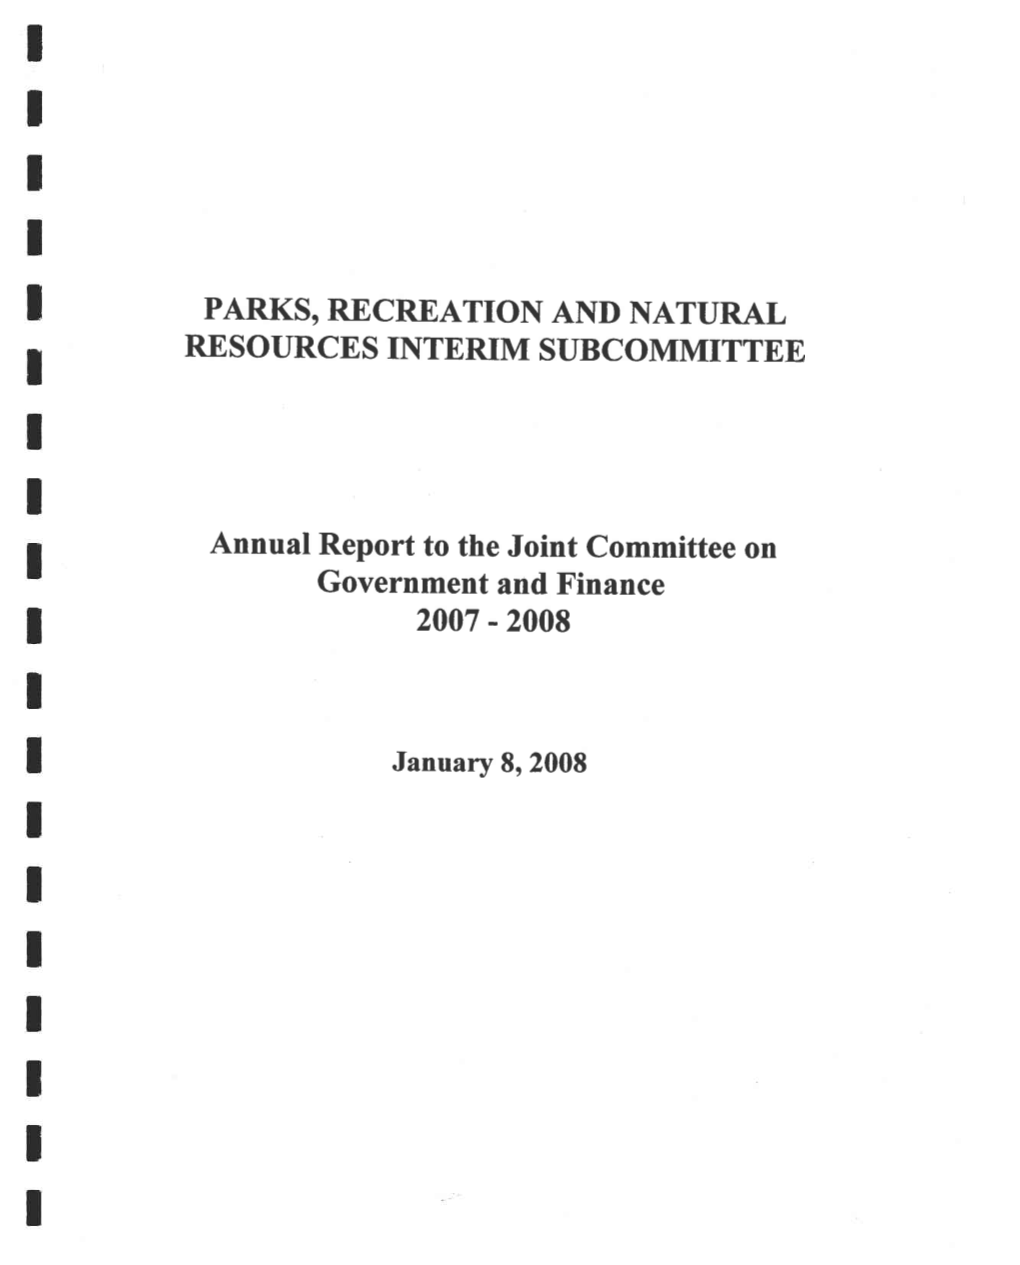 Parks, Recreation and Natural Resources Interim